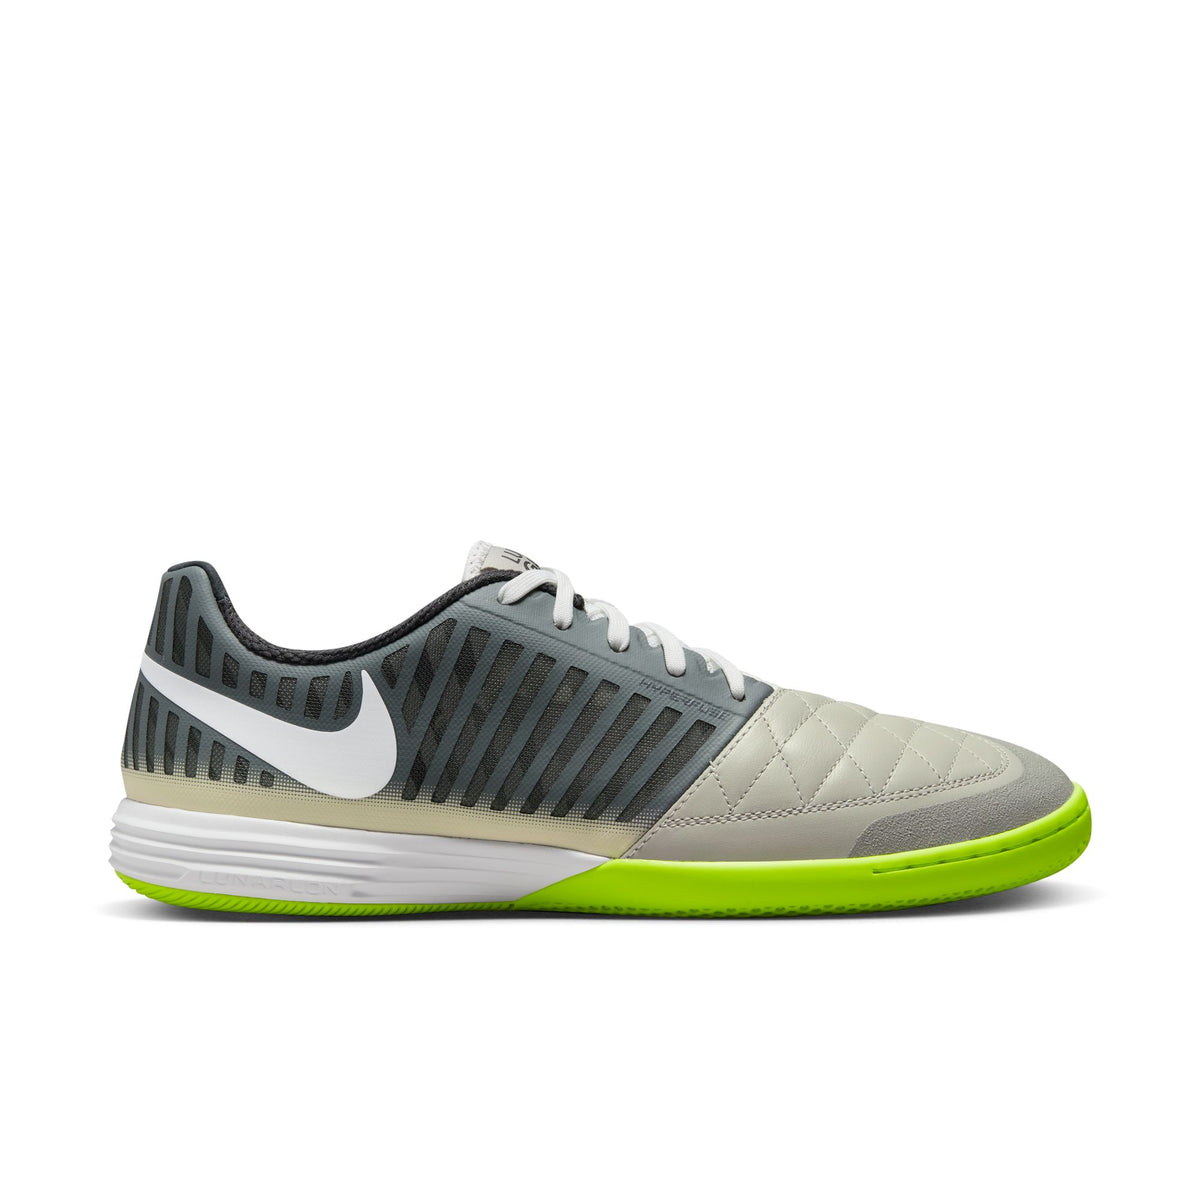 Nike Lunar Gato II IC - Smoke Grey / White with Anthracite with Pale G ...